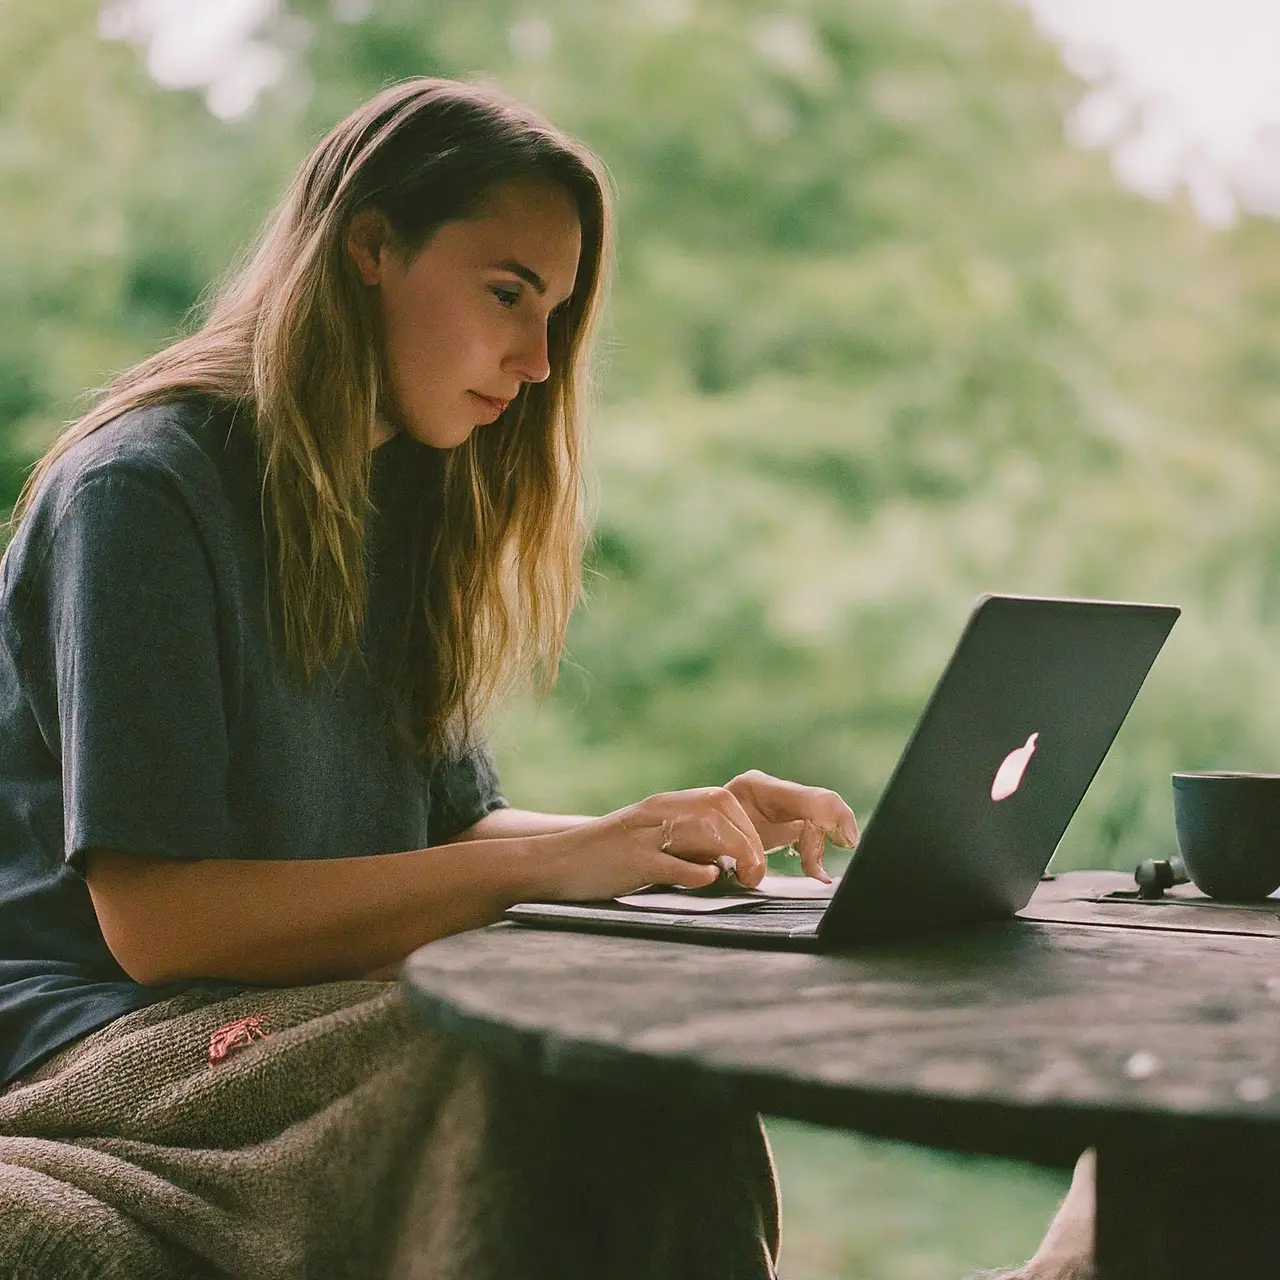 A woman using a laptop in a cozy, outdoor setting. 35mm stock photo